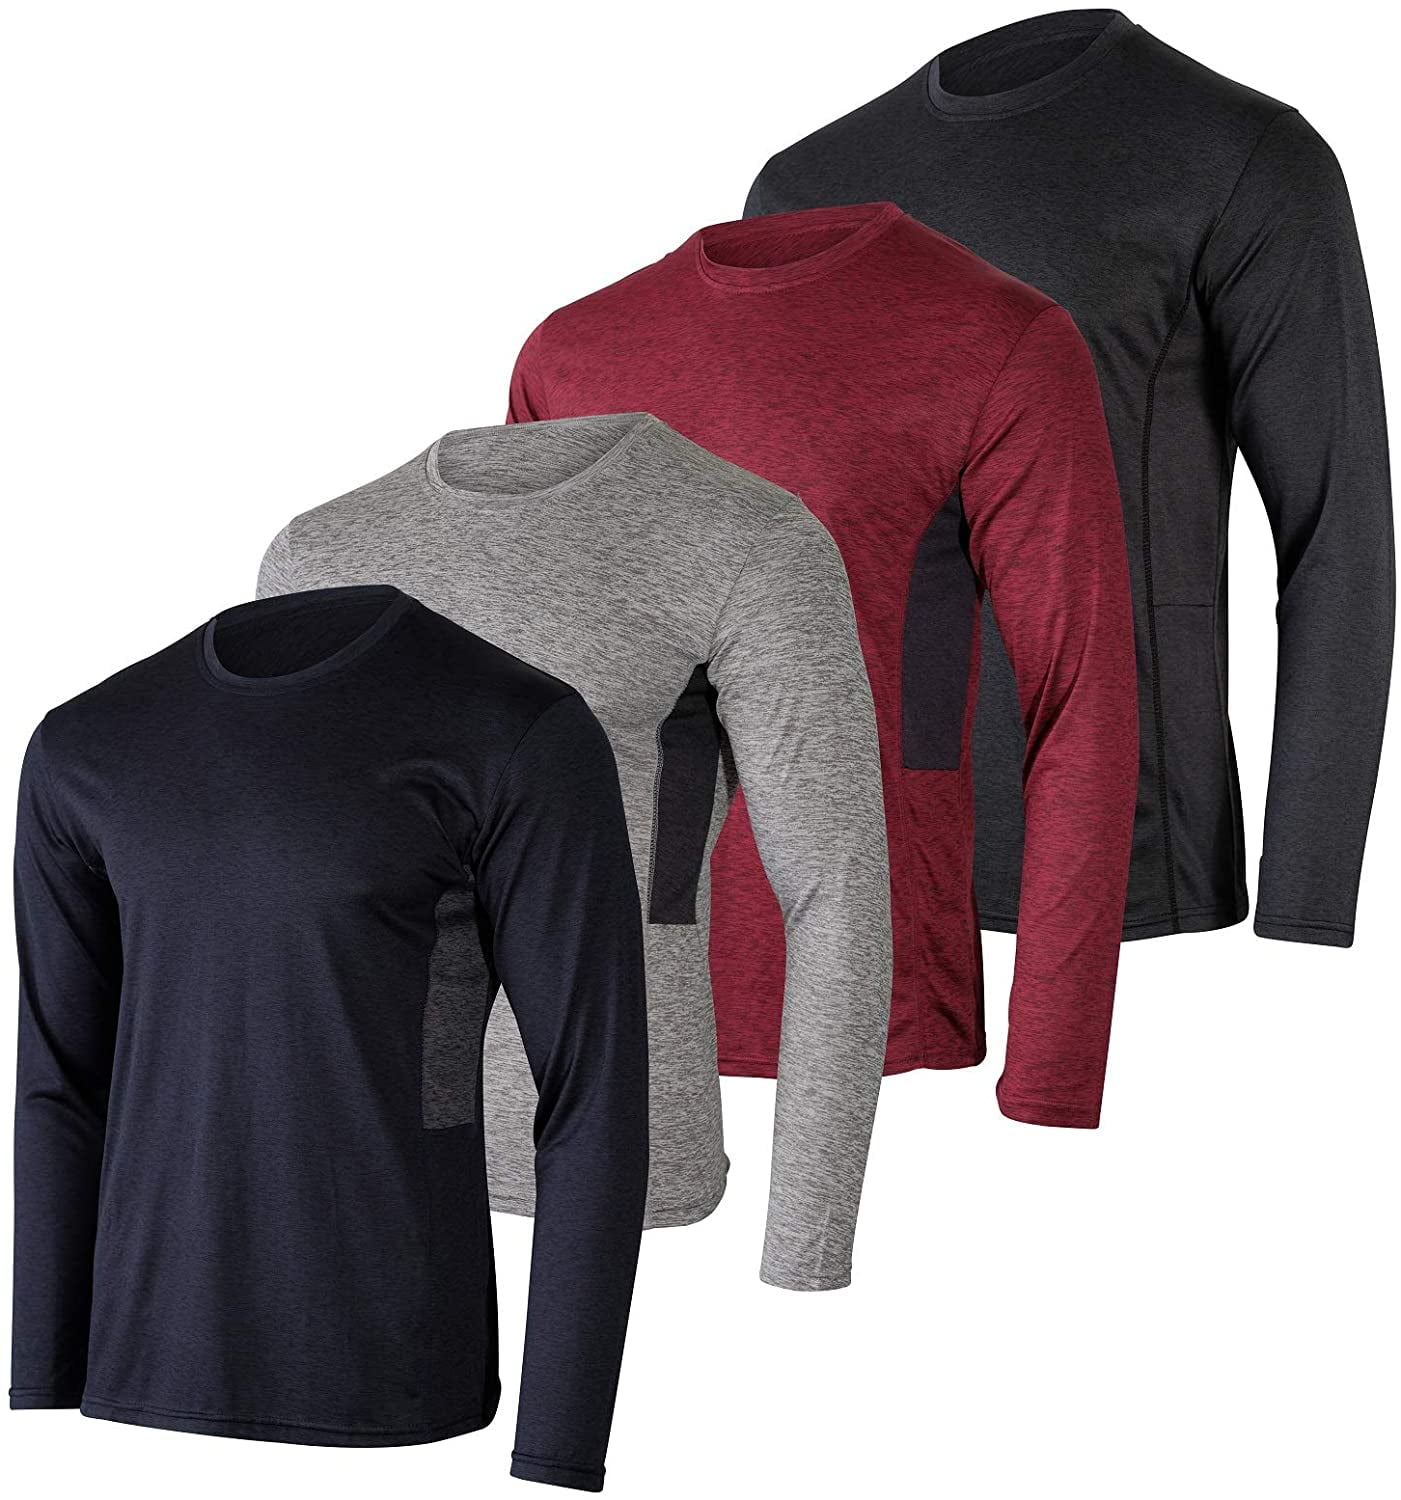 Premium Men’s Active Long Sleeve Tees Wicking Athletic UV Ray Protection 4 Pack 